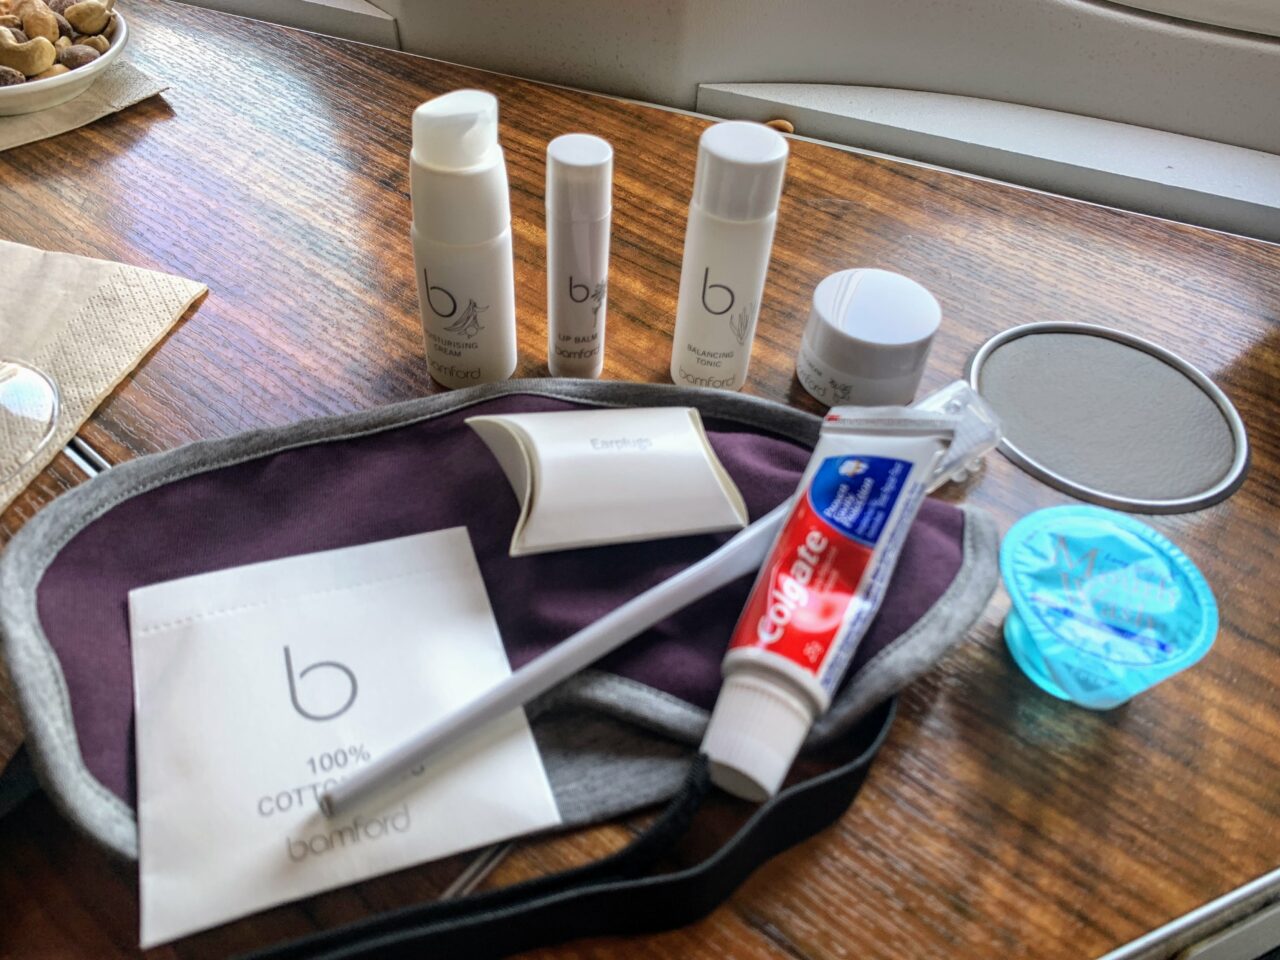 Cathay Pacific B777-300 First class toiletries 